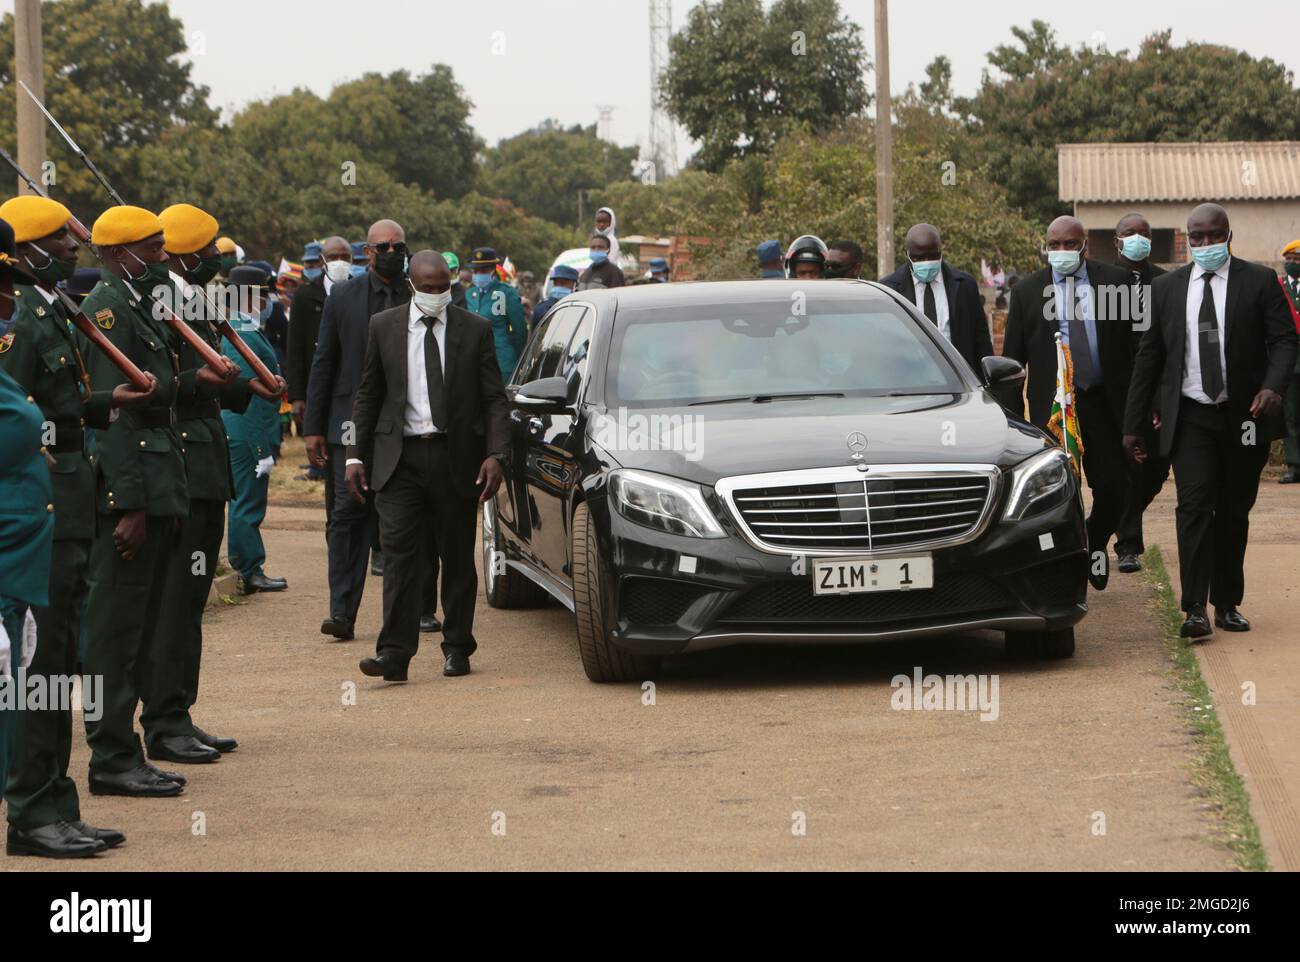 Zimbabwean President Emmerson Mnangagwa's vehicle is surrounded by bodyguards upon arrival for a State Funeral of a former military commander in Harare, Wednesday, June, 24, 2020. Mnangagwa attended the funeral of Stanely Nlyeya a liberation war hero who died on Tuesday. (AP Photo/Tsvangirayi Mukwazhi) Stock Photo